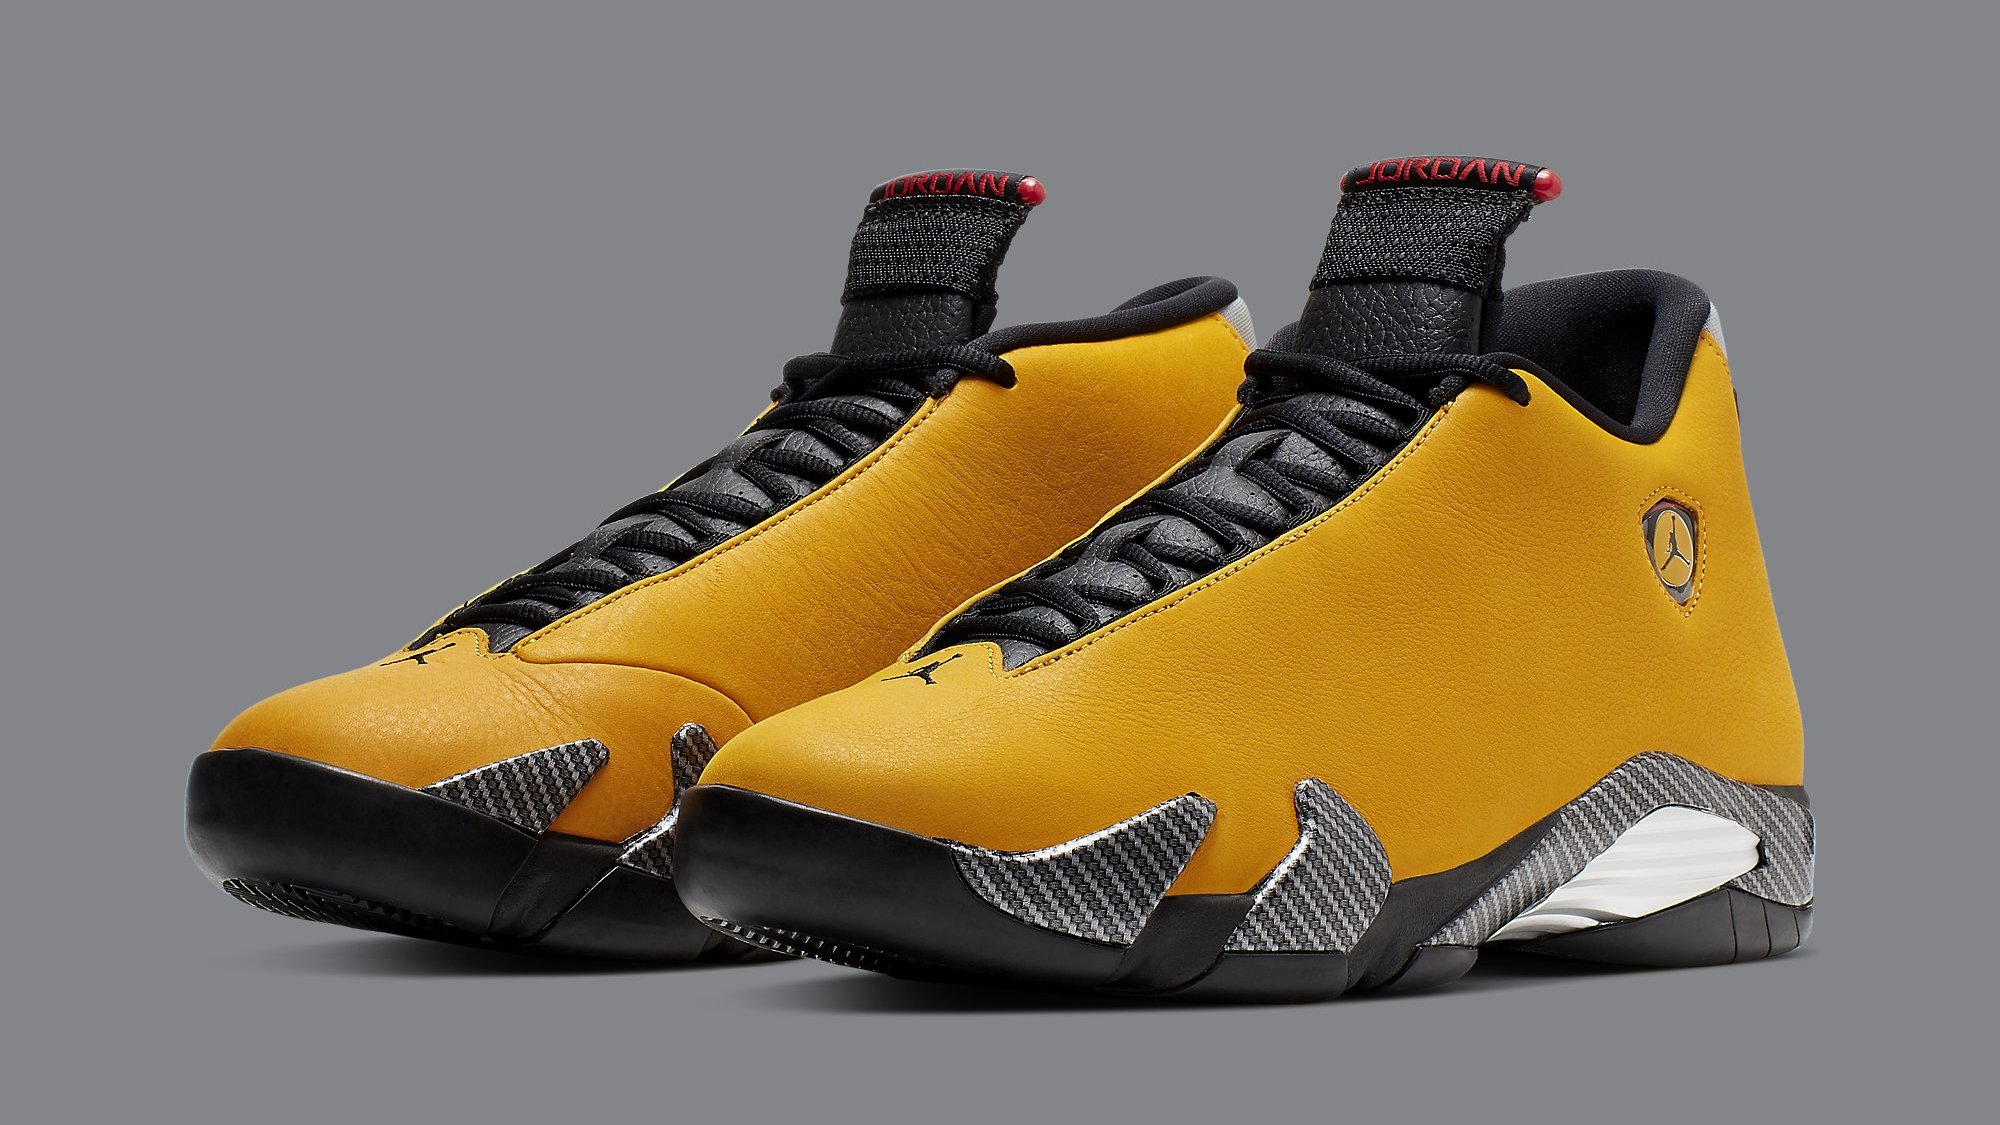 black and yellow 14 jordans release date